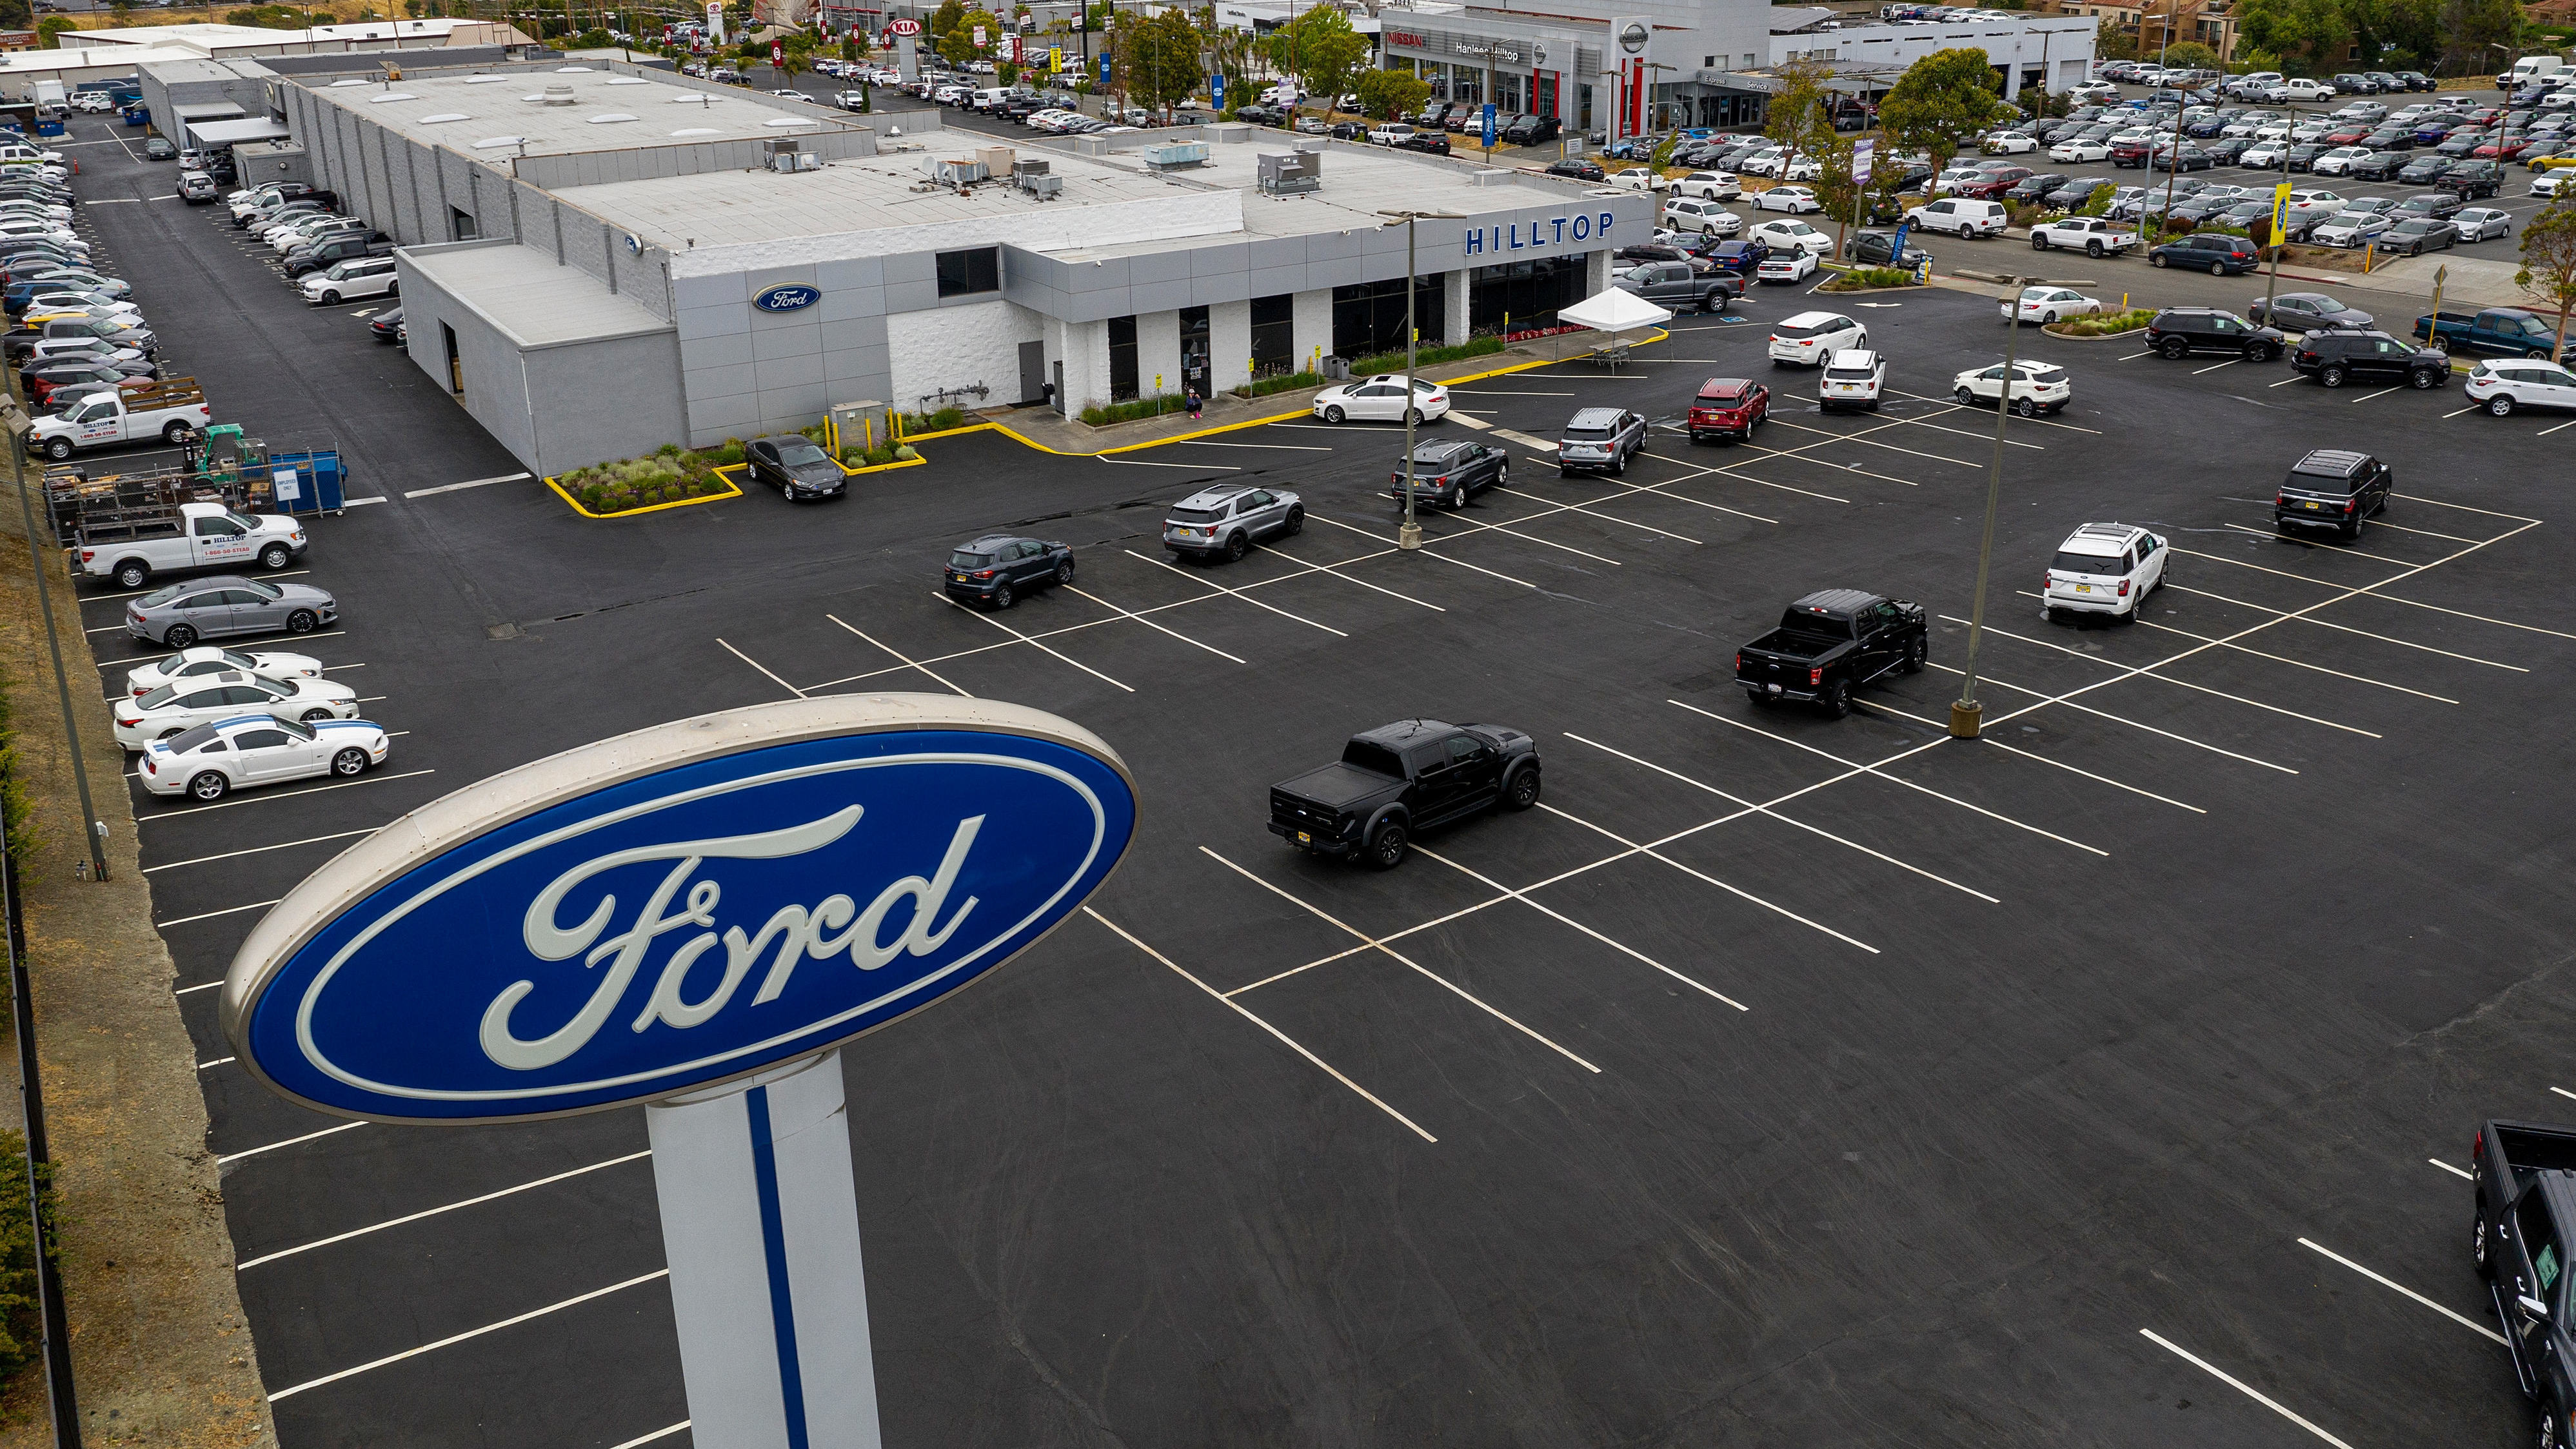 Ken garff ford sells and services ford vehicles in the greater salt lake city ut area. Shopping For A Car In The Pandemic Here S What To Keep In Mind Npr